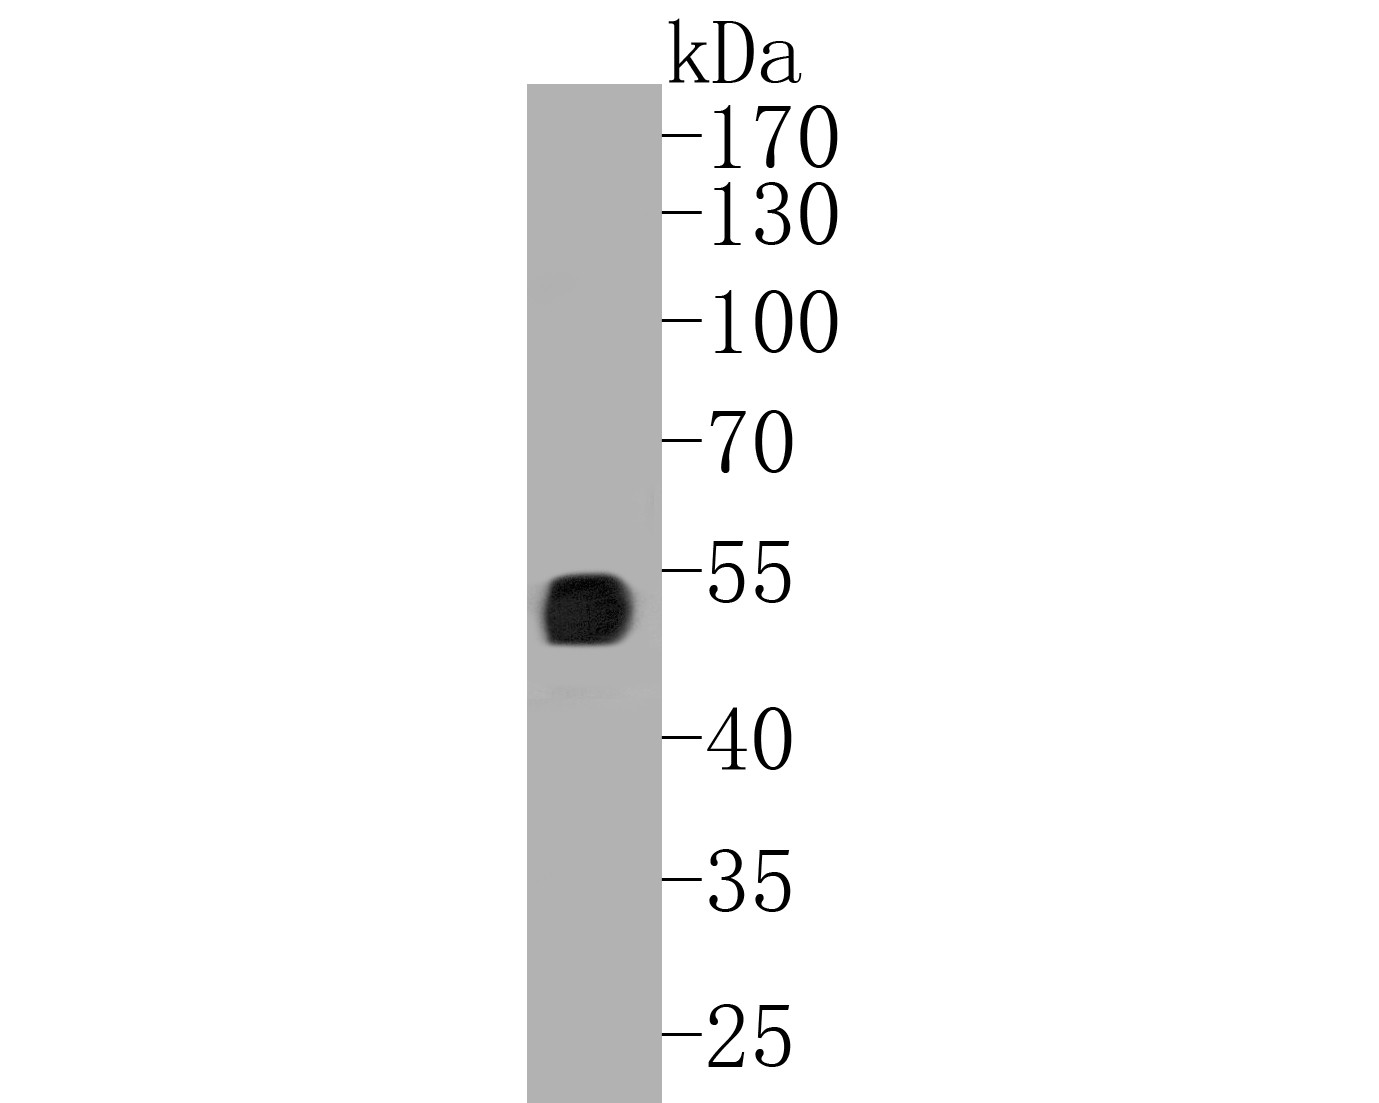 Western blot analysis of UBA3 on 293T cell lysates. Proteins were transferred to a PVDF membrane and blocked with 5% BSA in PBS for 1 hour at room temperature. The primary antibody (EM1901-64, 1/500) was used in 5% BSA at room temperature for 2 hours. Goat Anti-Mouse IgG - HRP Secondary Antibody (HA1006) at 1:5,000 dilution was used for 1 hour at room temperature.